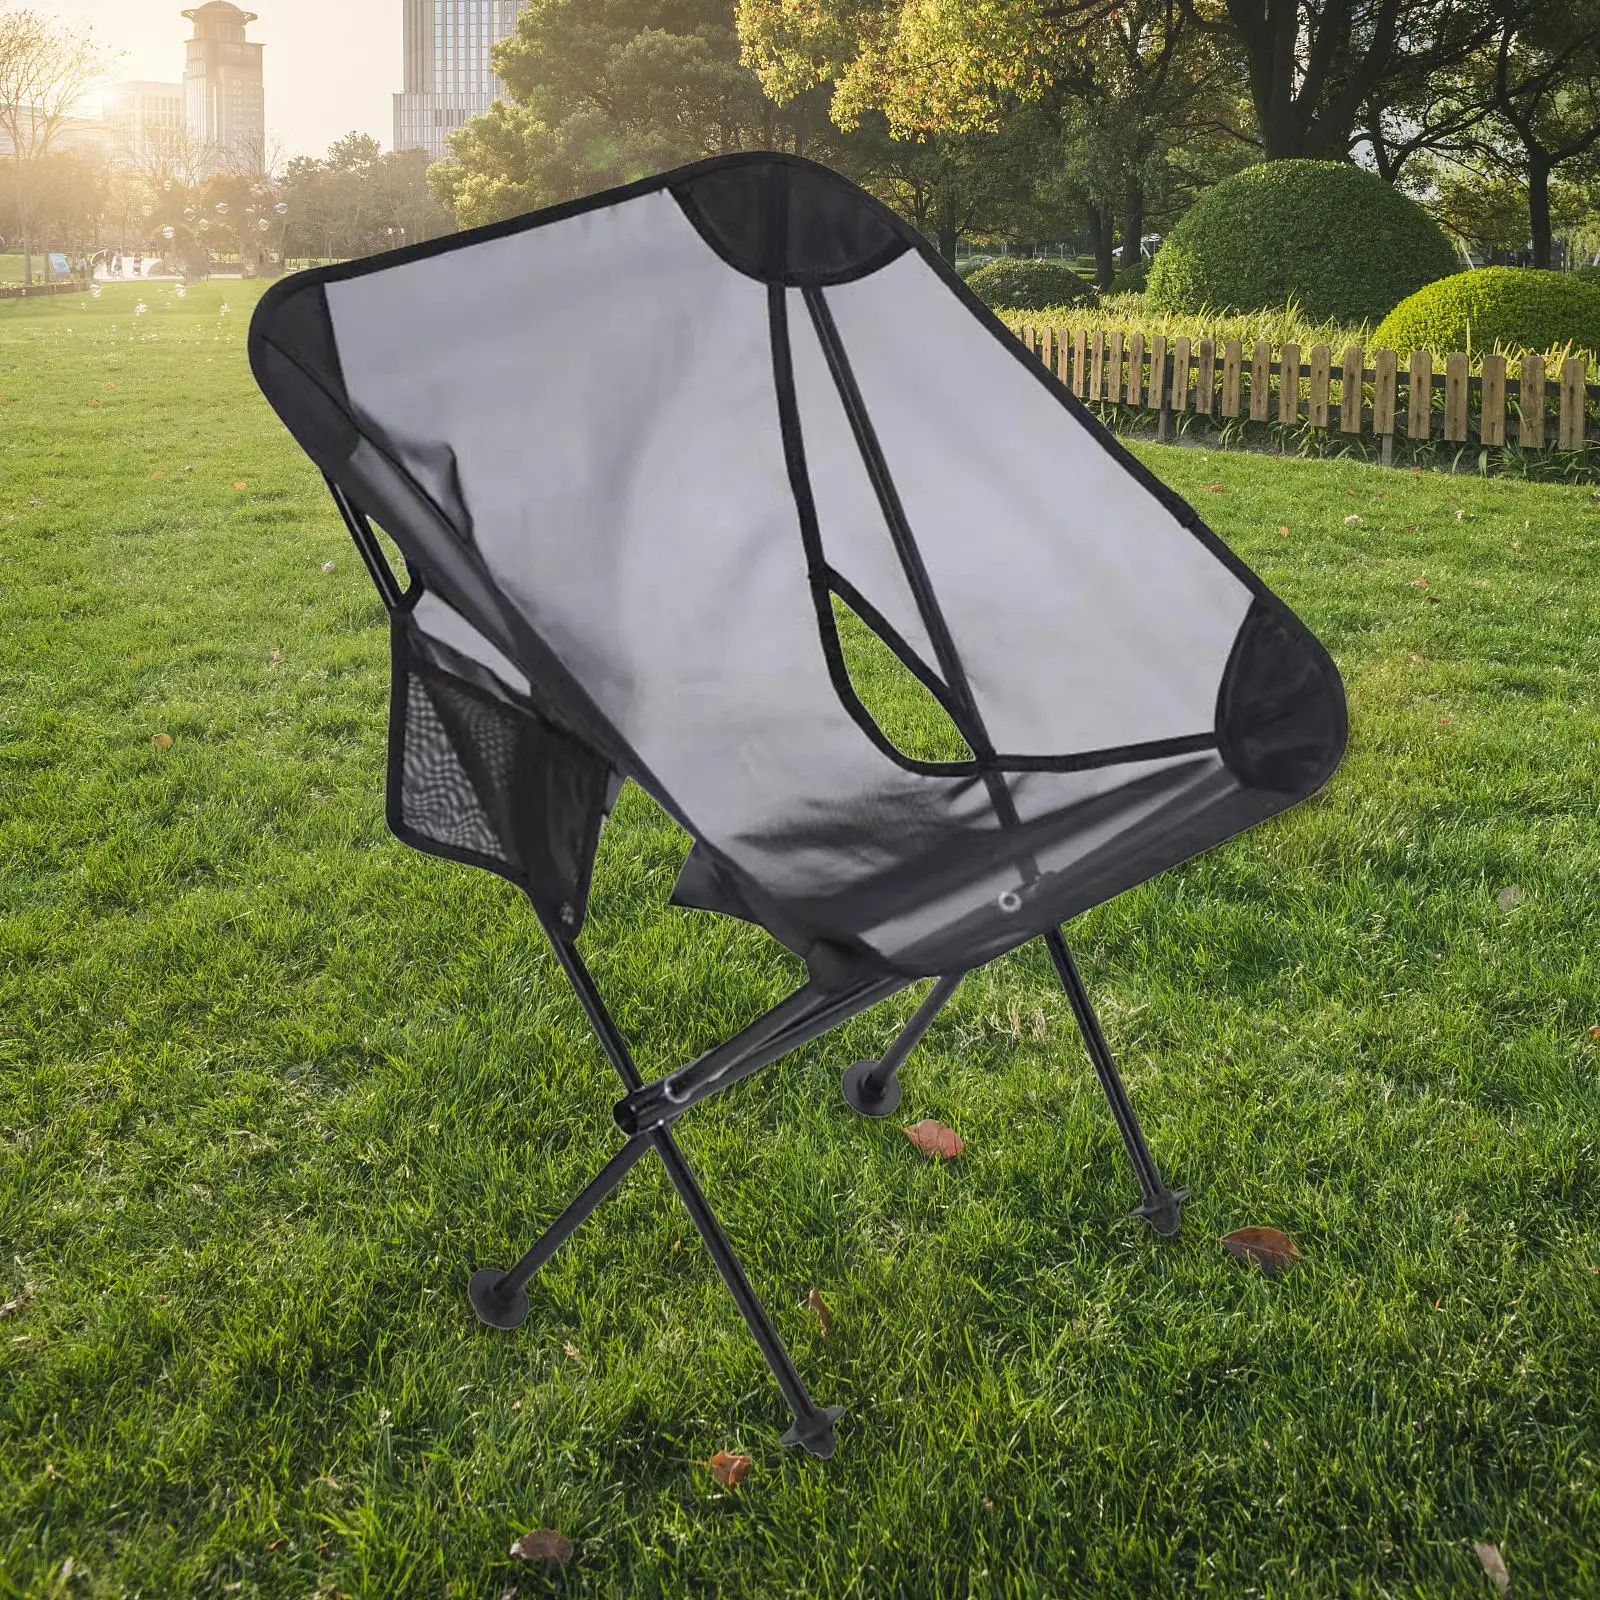 Folding Camping Chair Outdoor Moon Chair Outdoor Concerts Durable Portable with Side Pockets Gardens Campings Folding Chair